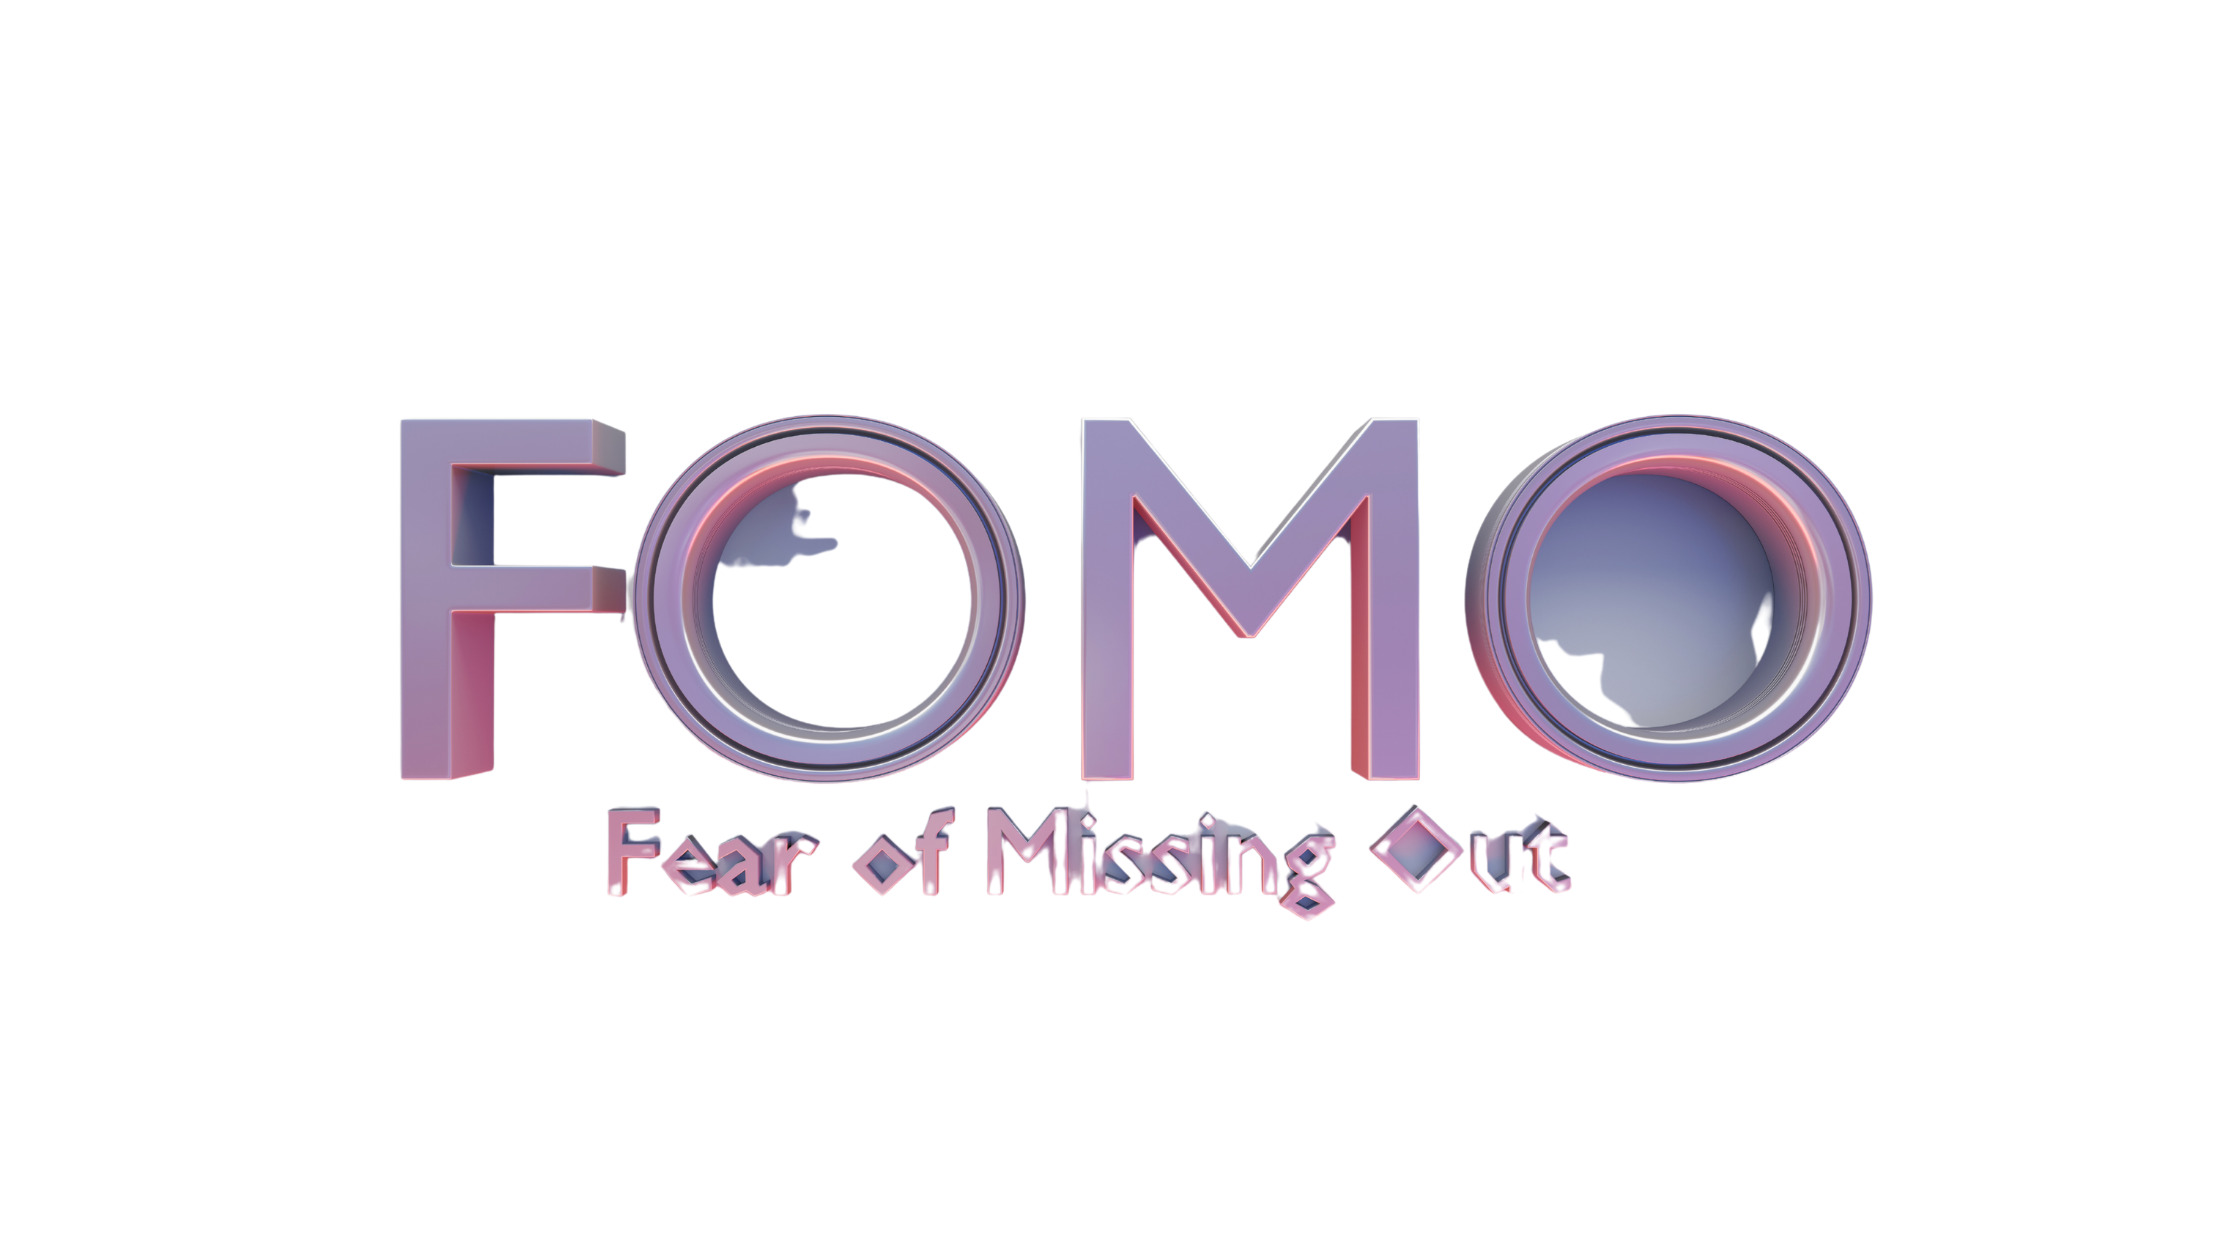 FOMO Bronwen Sciortino Keep It Super Simple The Economy of Enough resilient resilience stress leadership mindful minfulness burnout perfectionism personal development leadership development